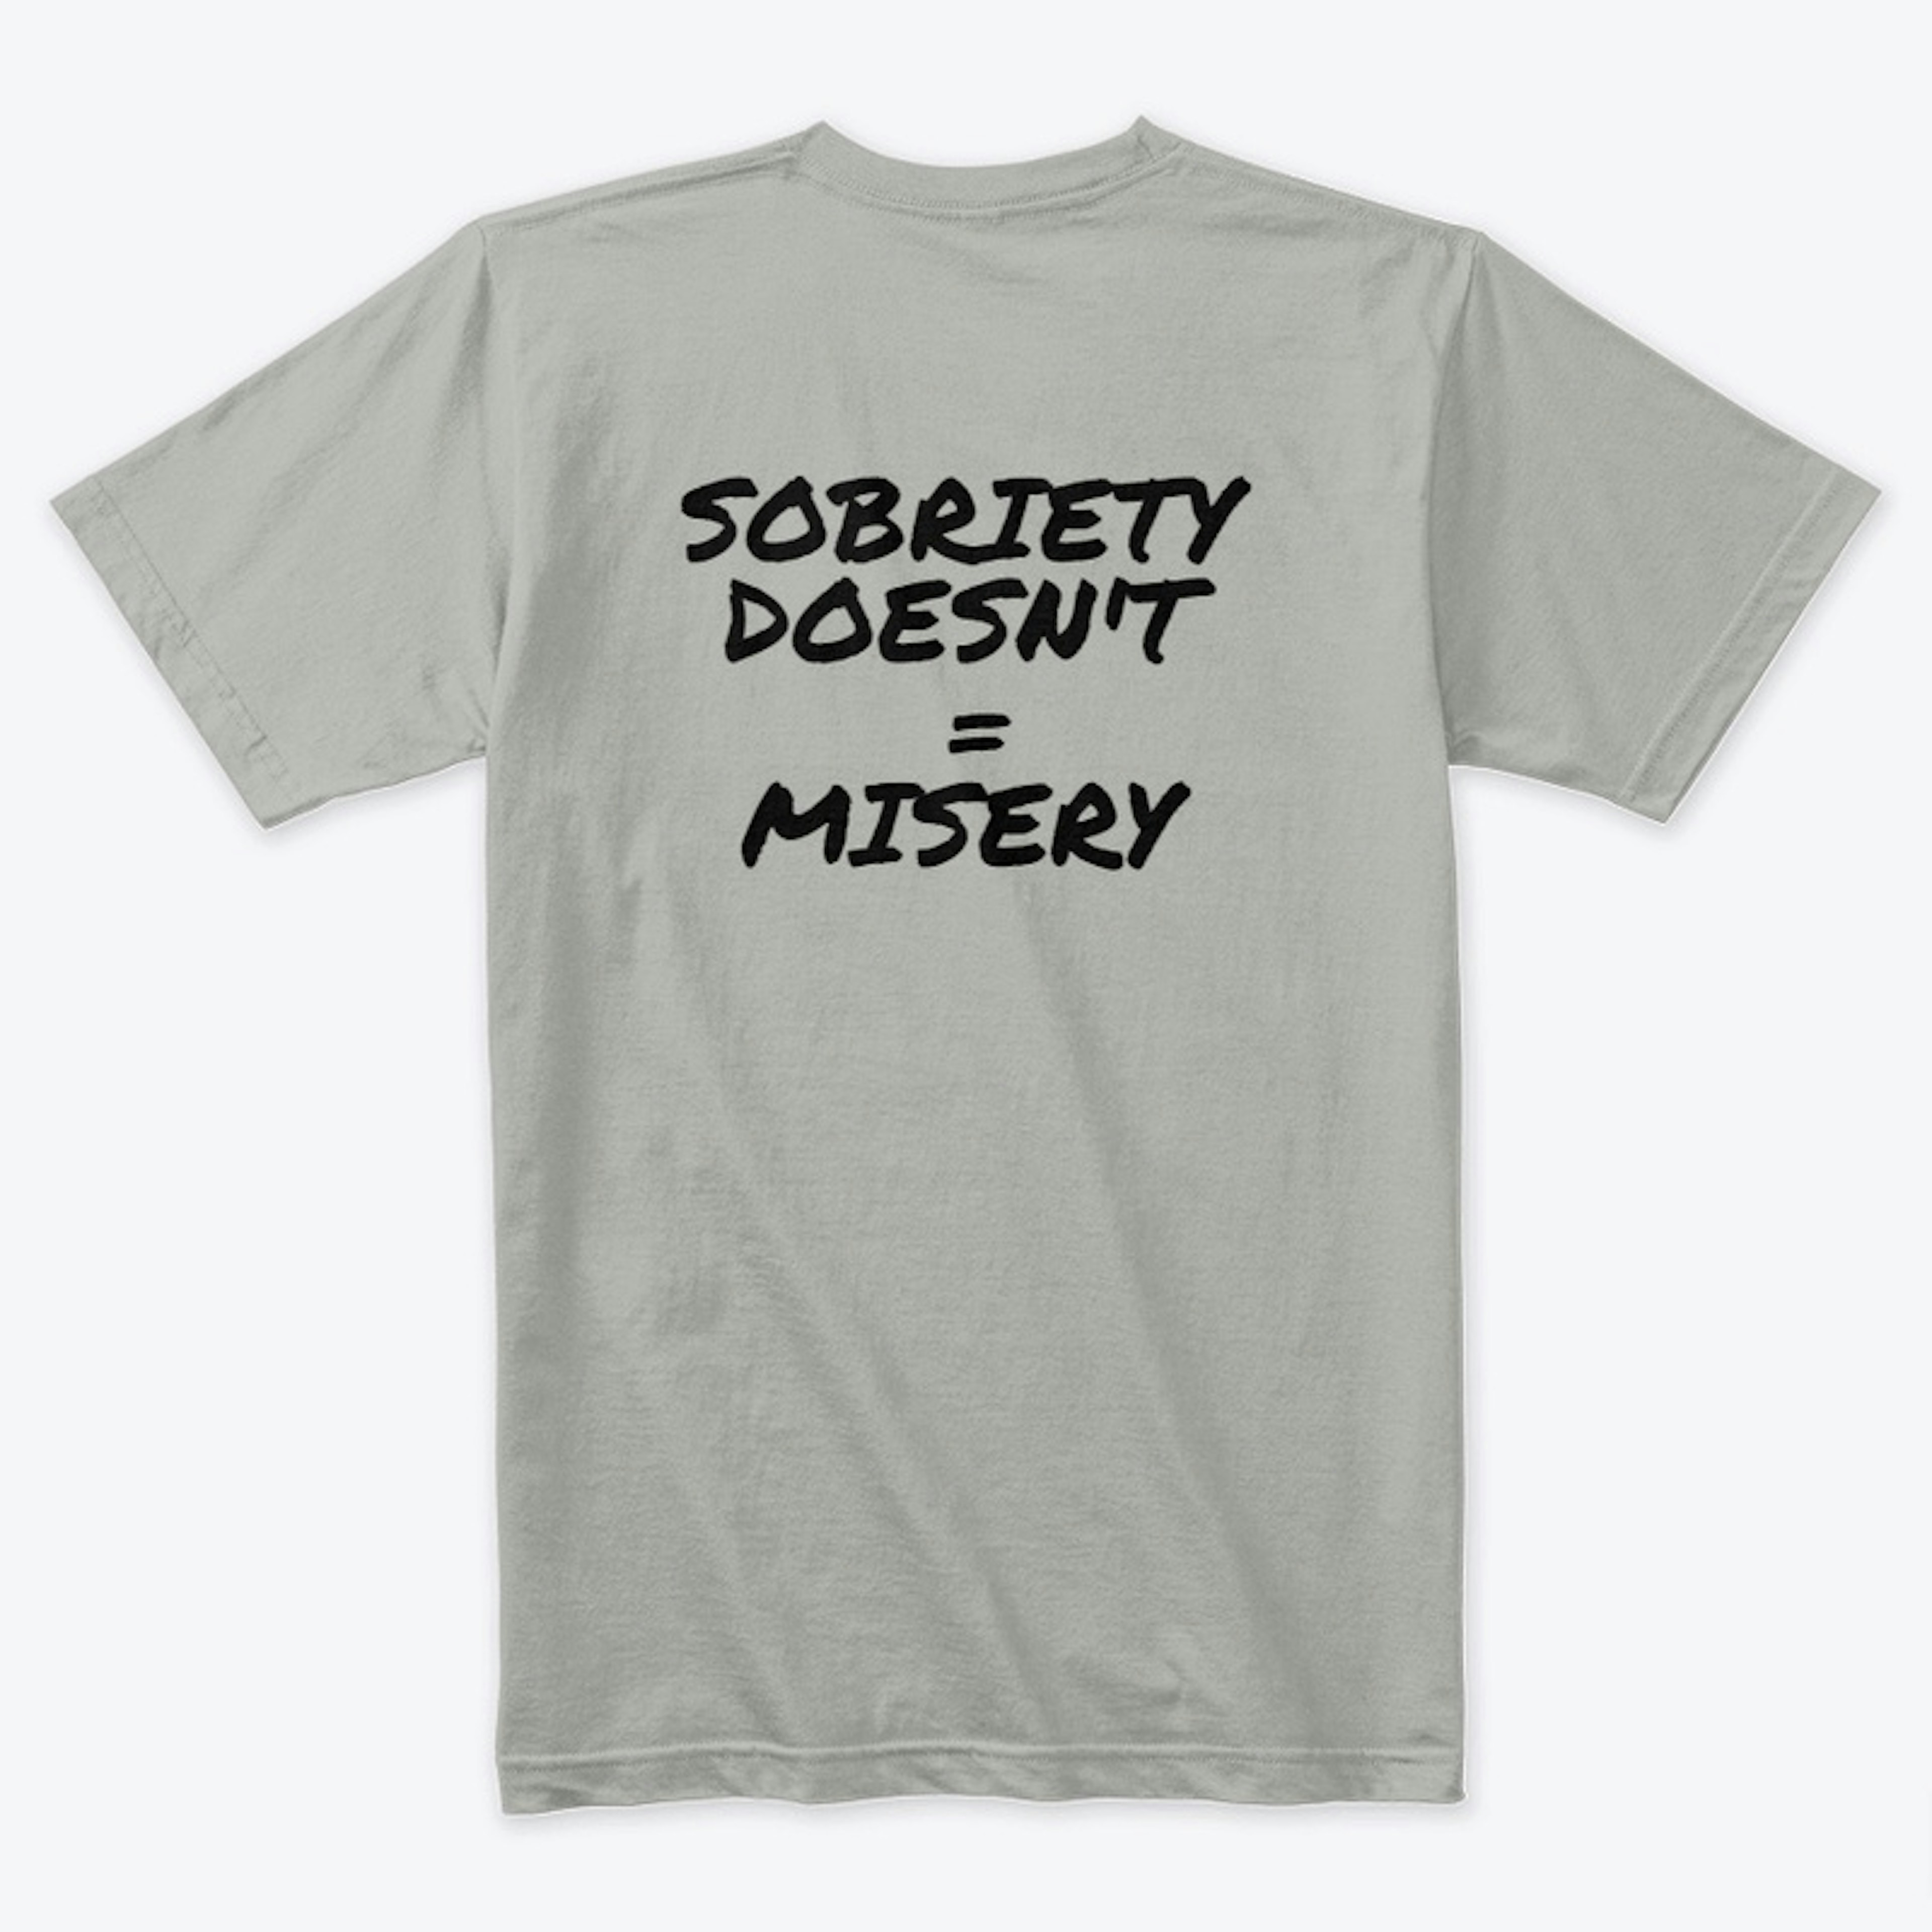 Sobriety Doesn't = Misery